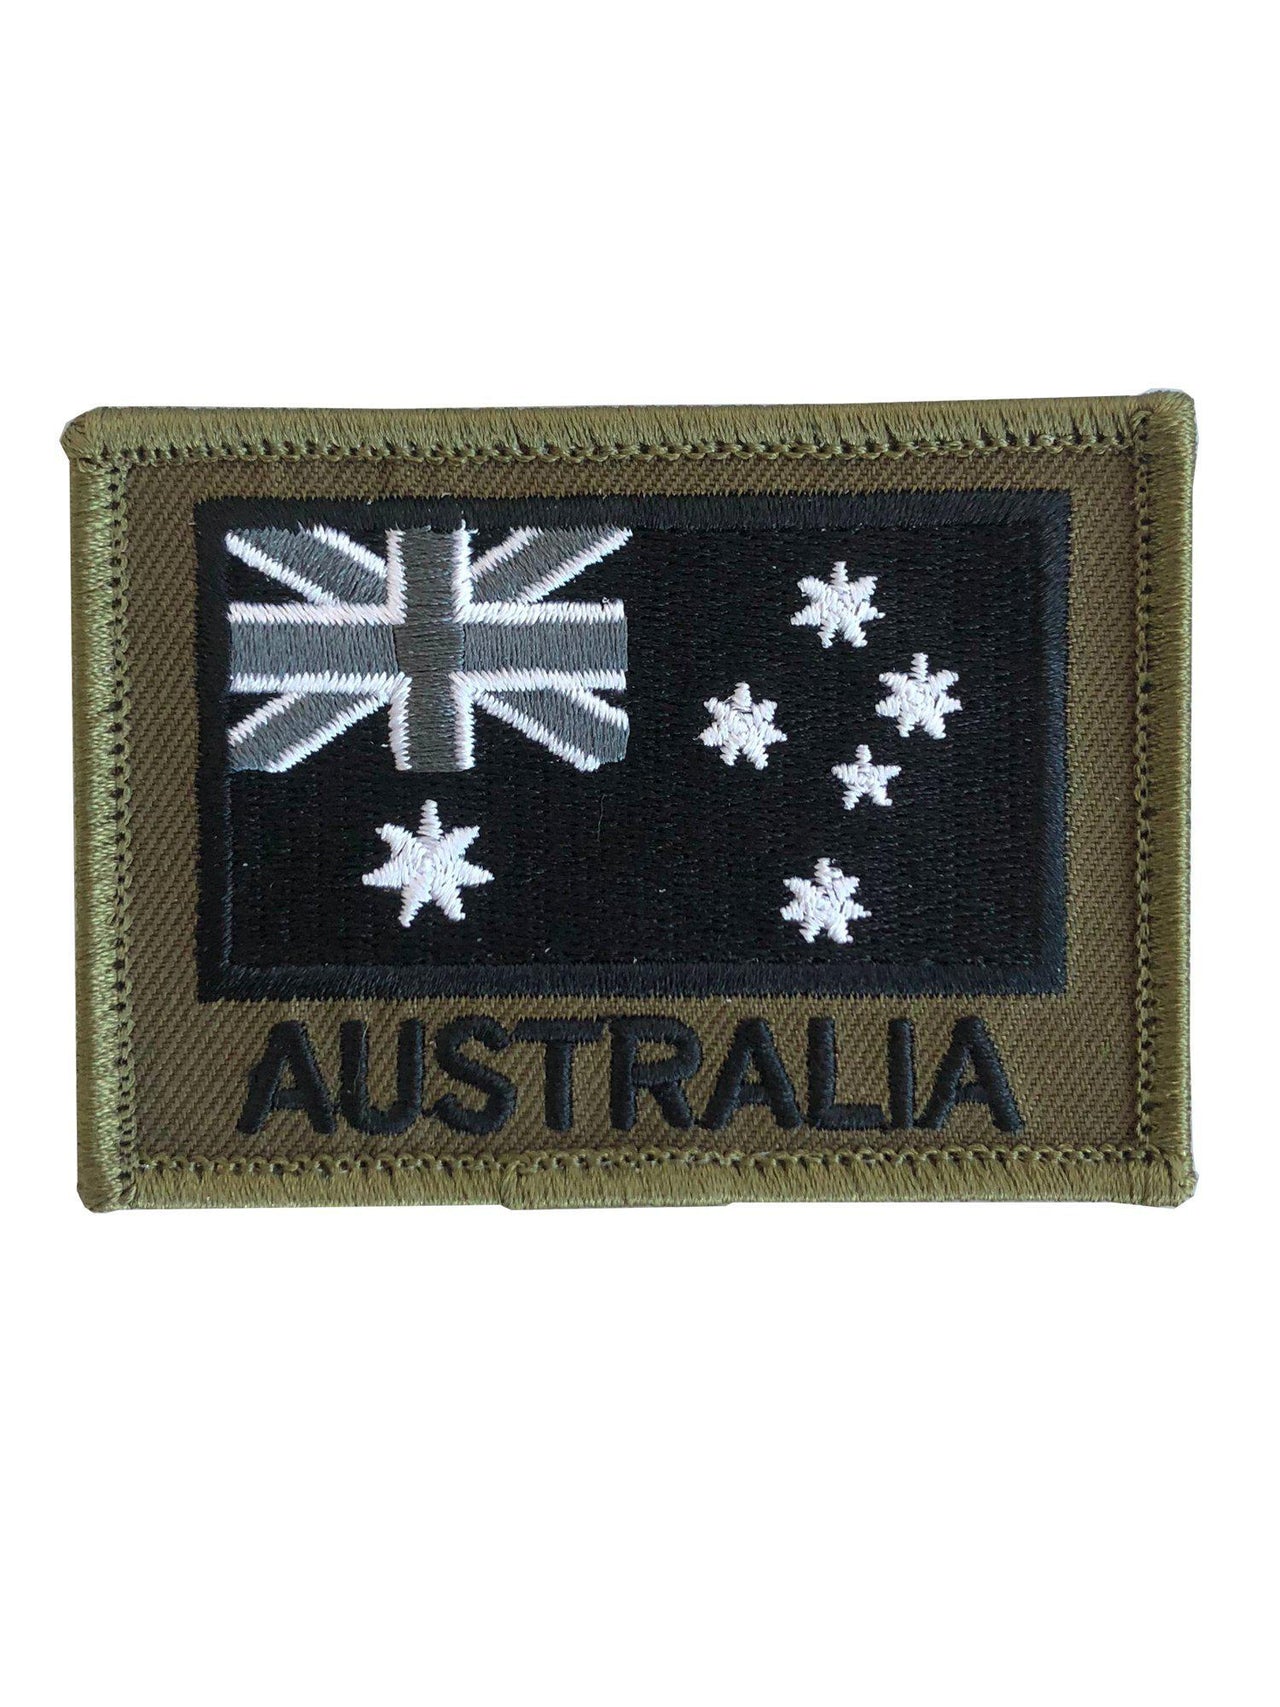 TacSource AUS Flag Patch - Black on Olive - TacSource